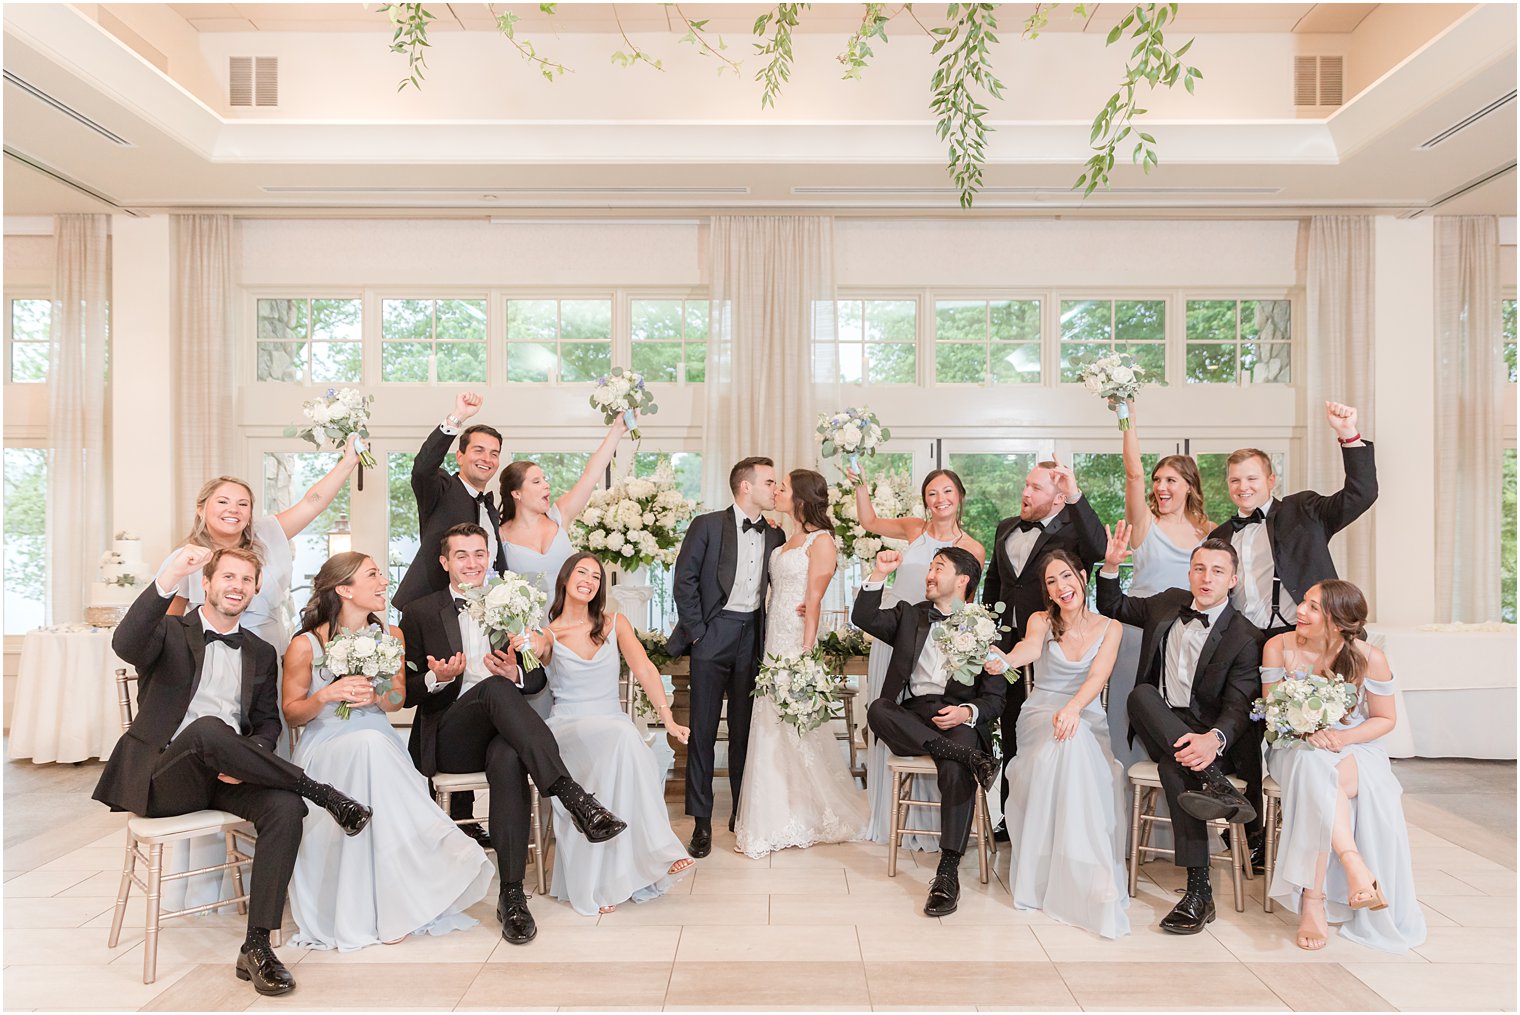 newlyweds kiss while bridal party surrounds them at Indian Trail Club